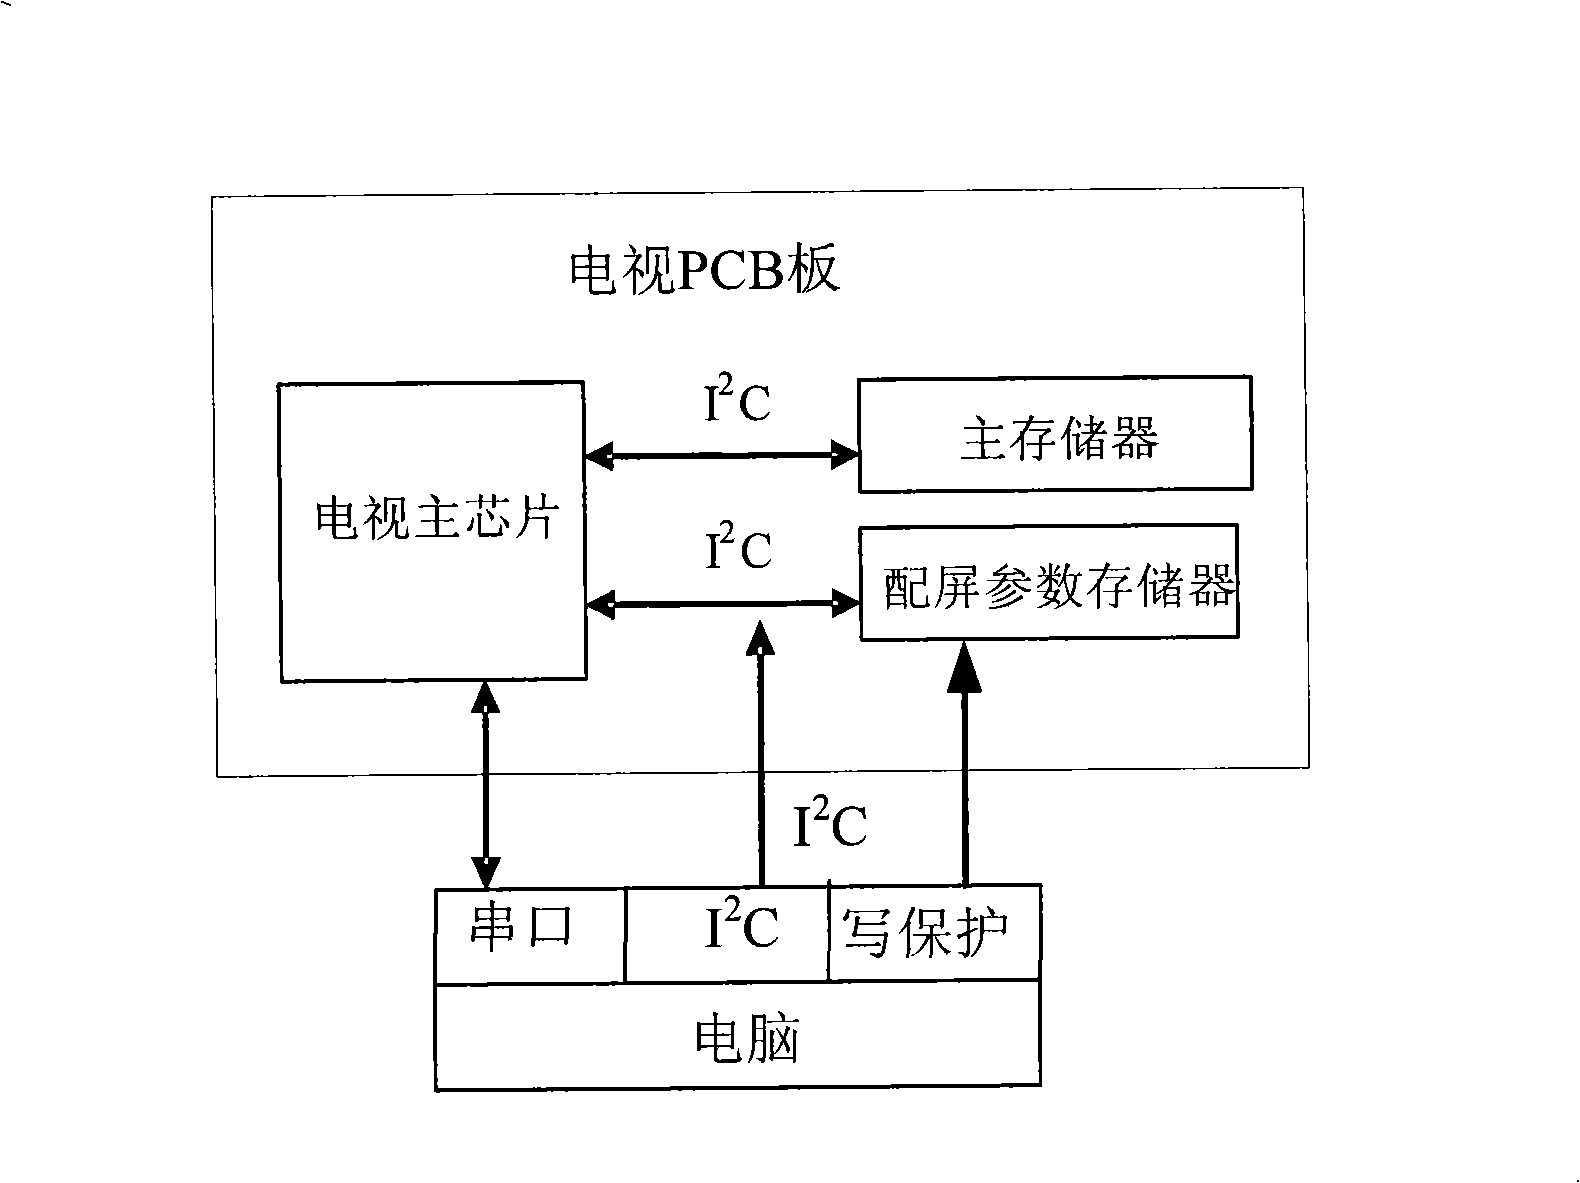 Method and system for matching screen of flat panel display